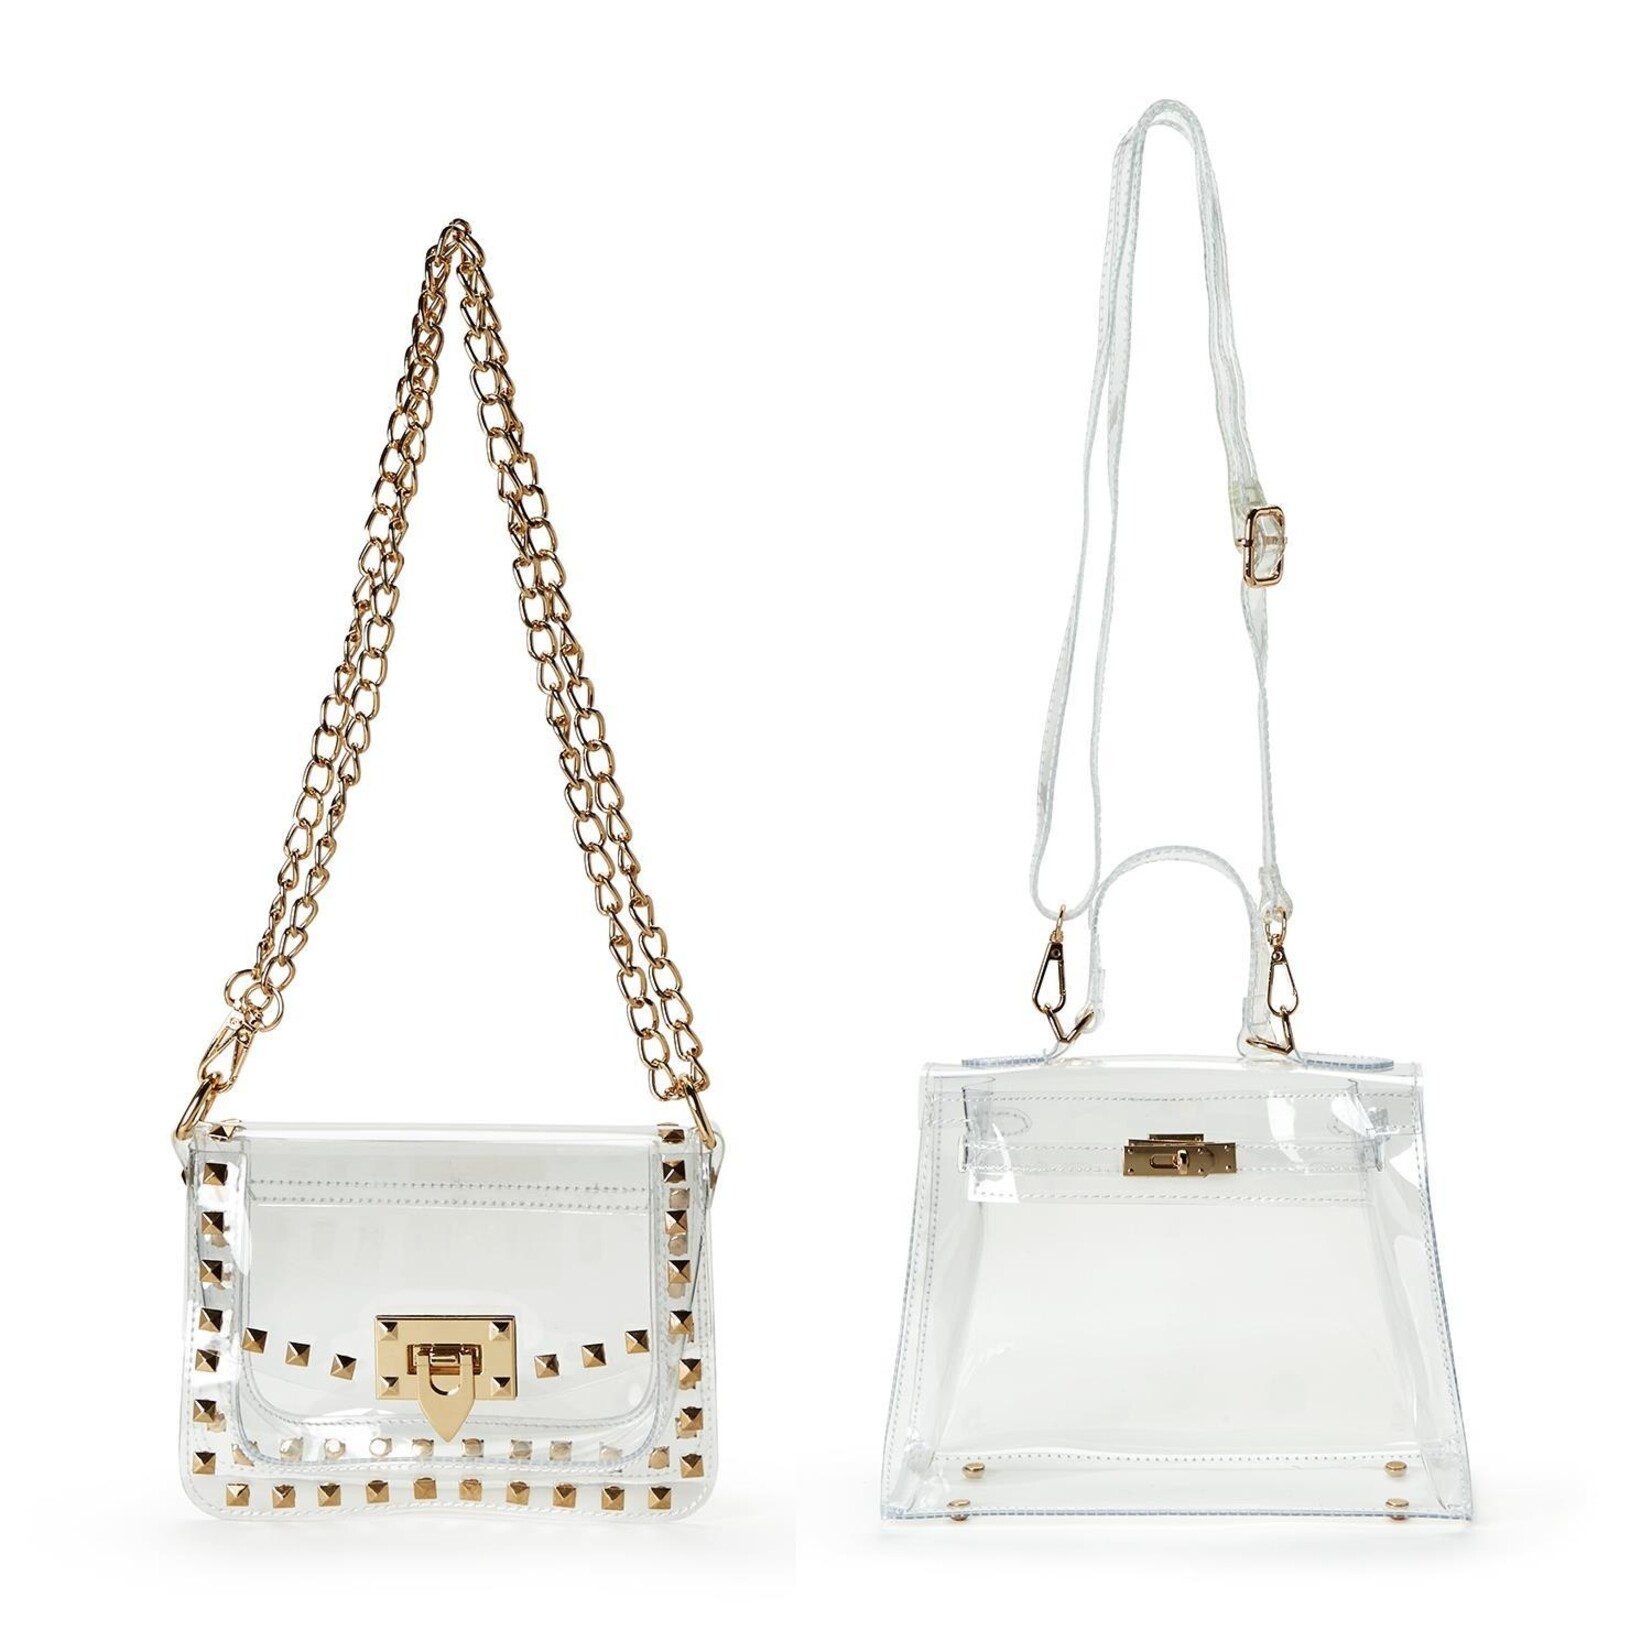 Two's Company Clear View See Through Bags with Gold Hardware